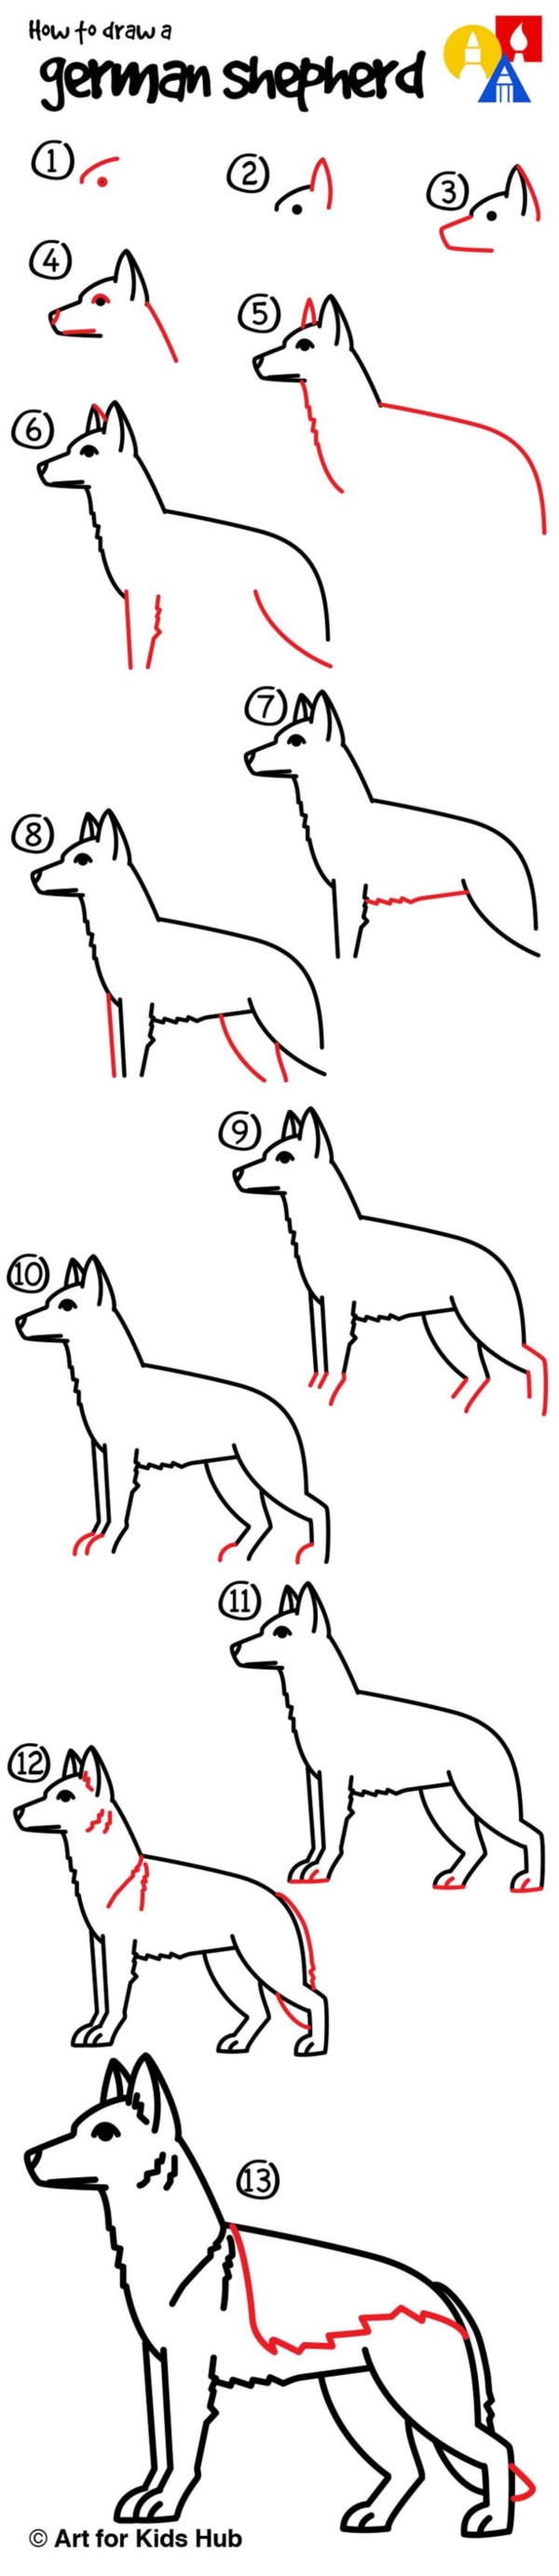 how-to-draw-a-dog-step-by-step-easily